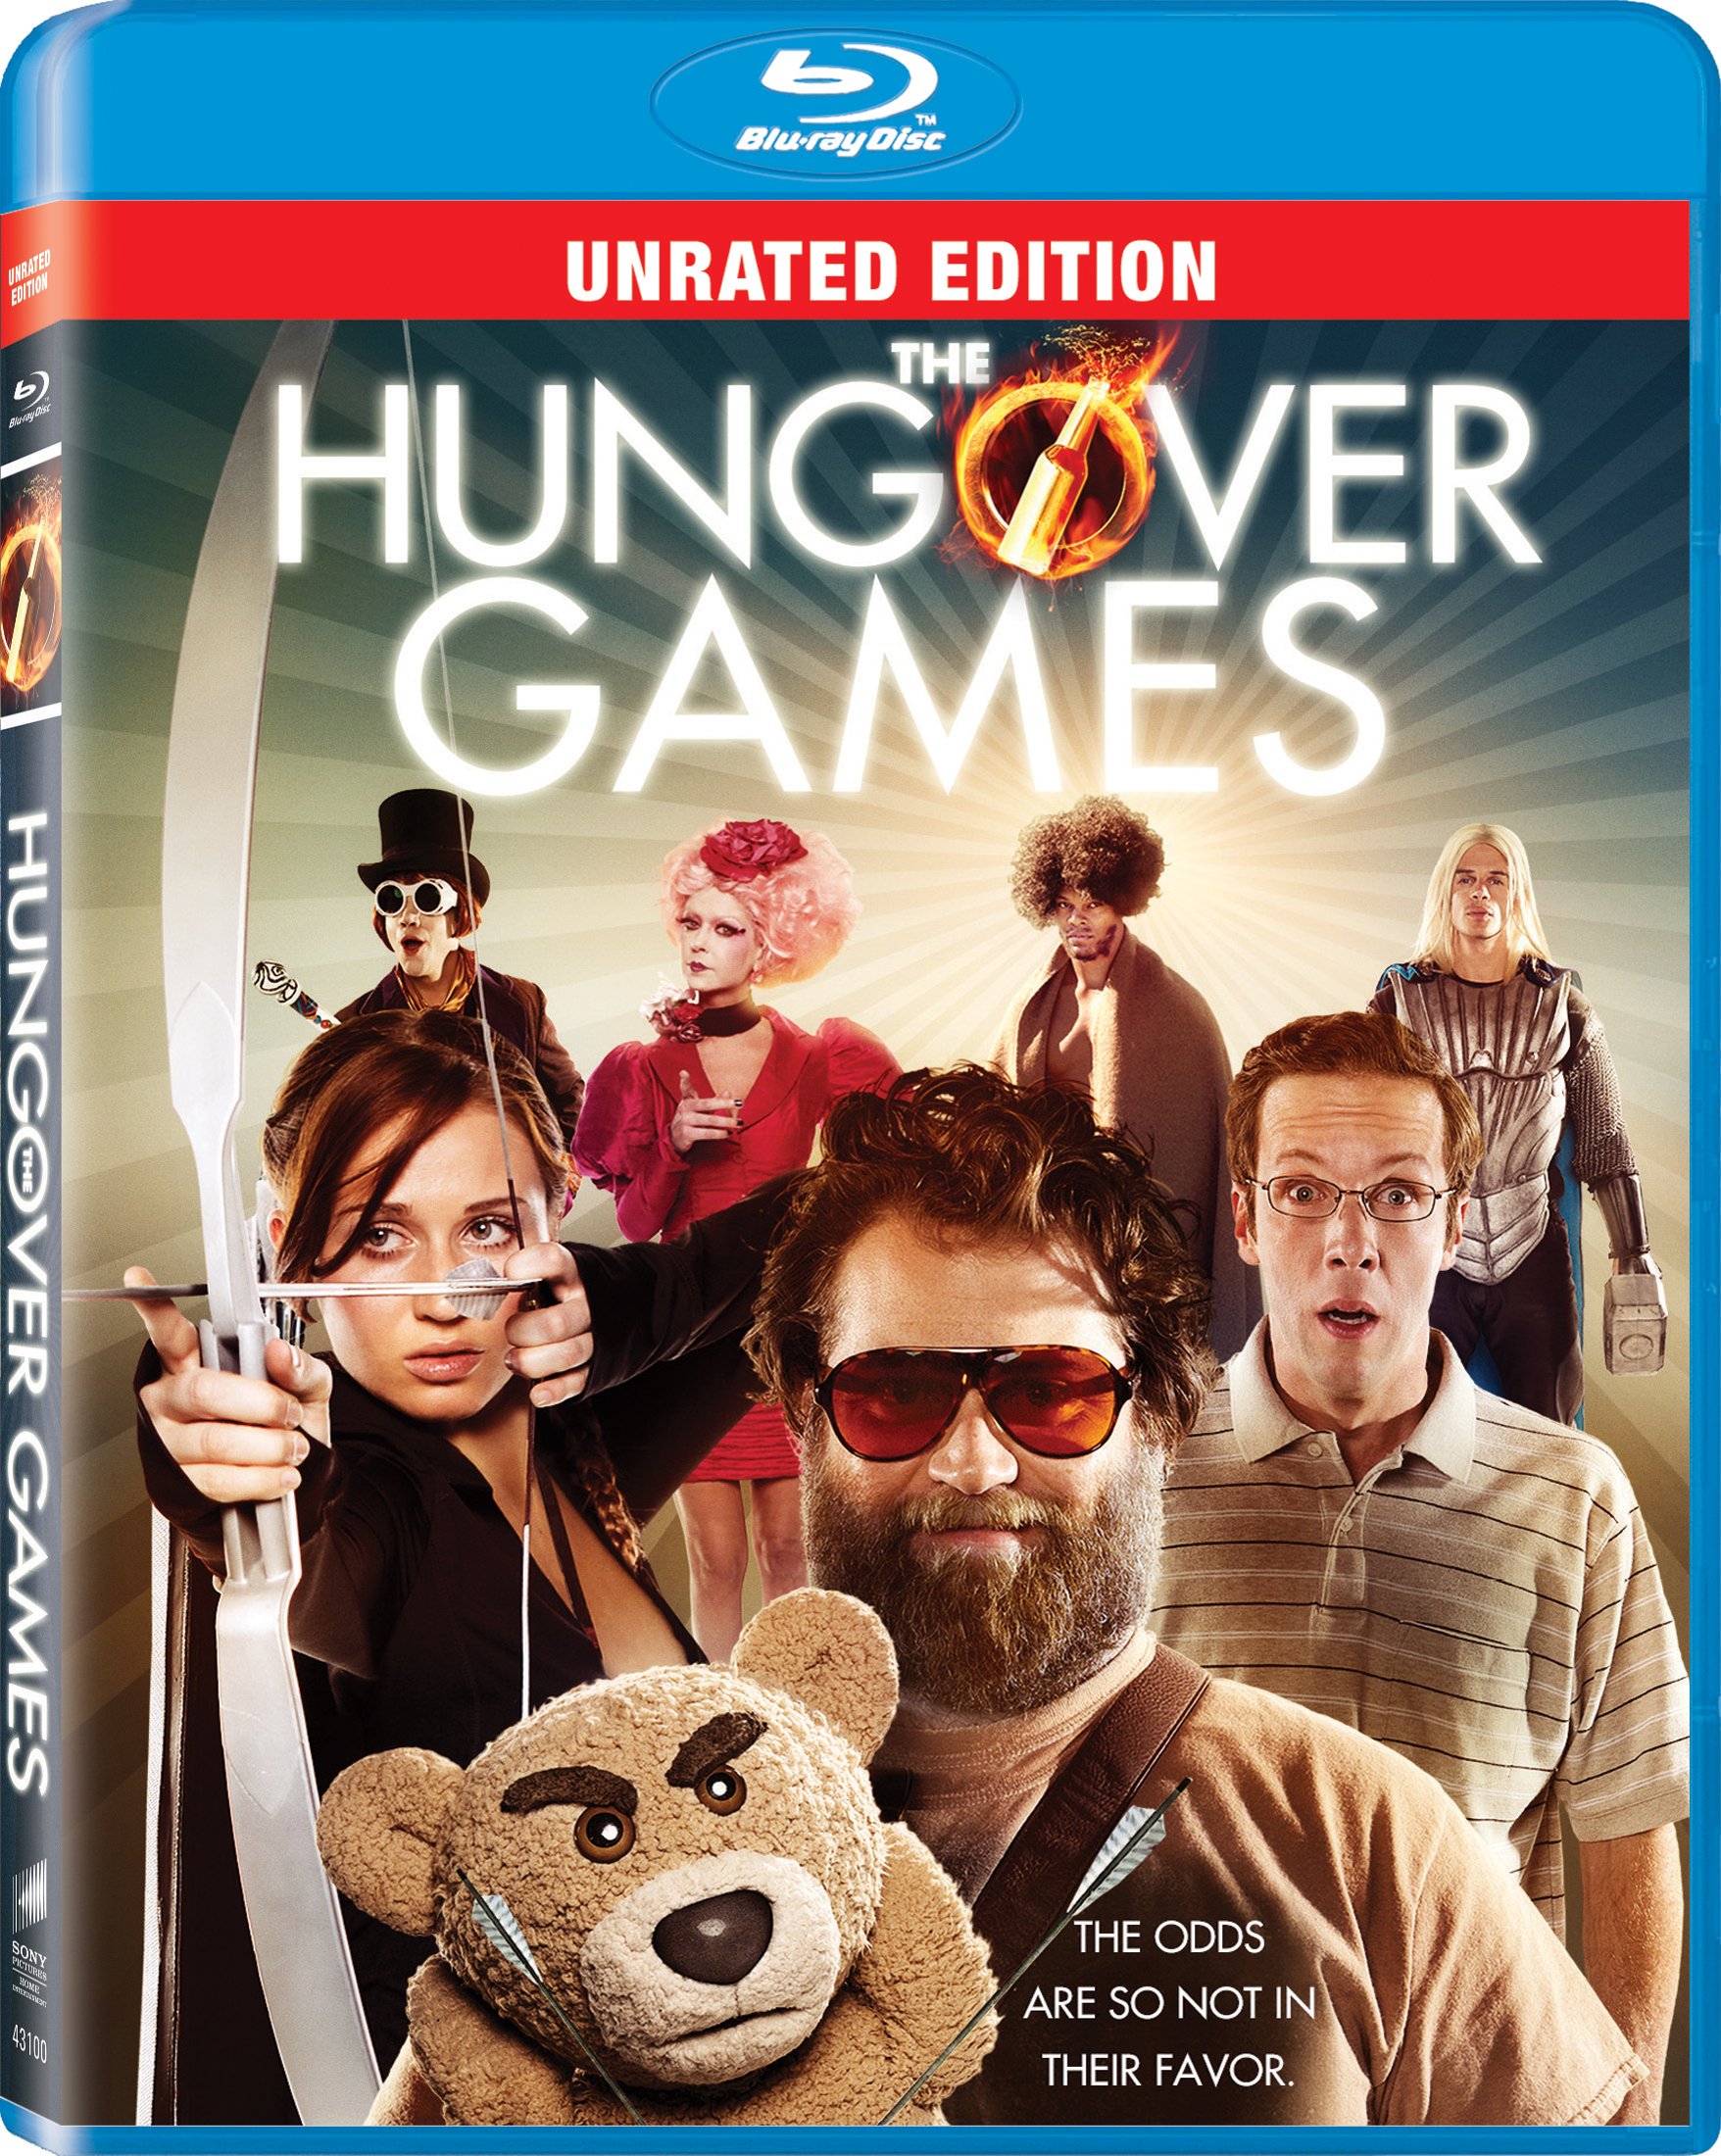 The Hungover Games DVD Release Date March 11, 20141756 x 2200